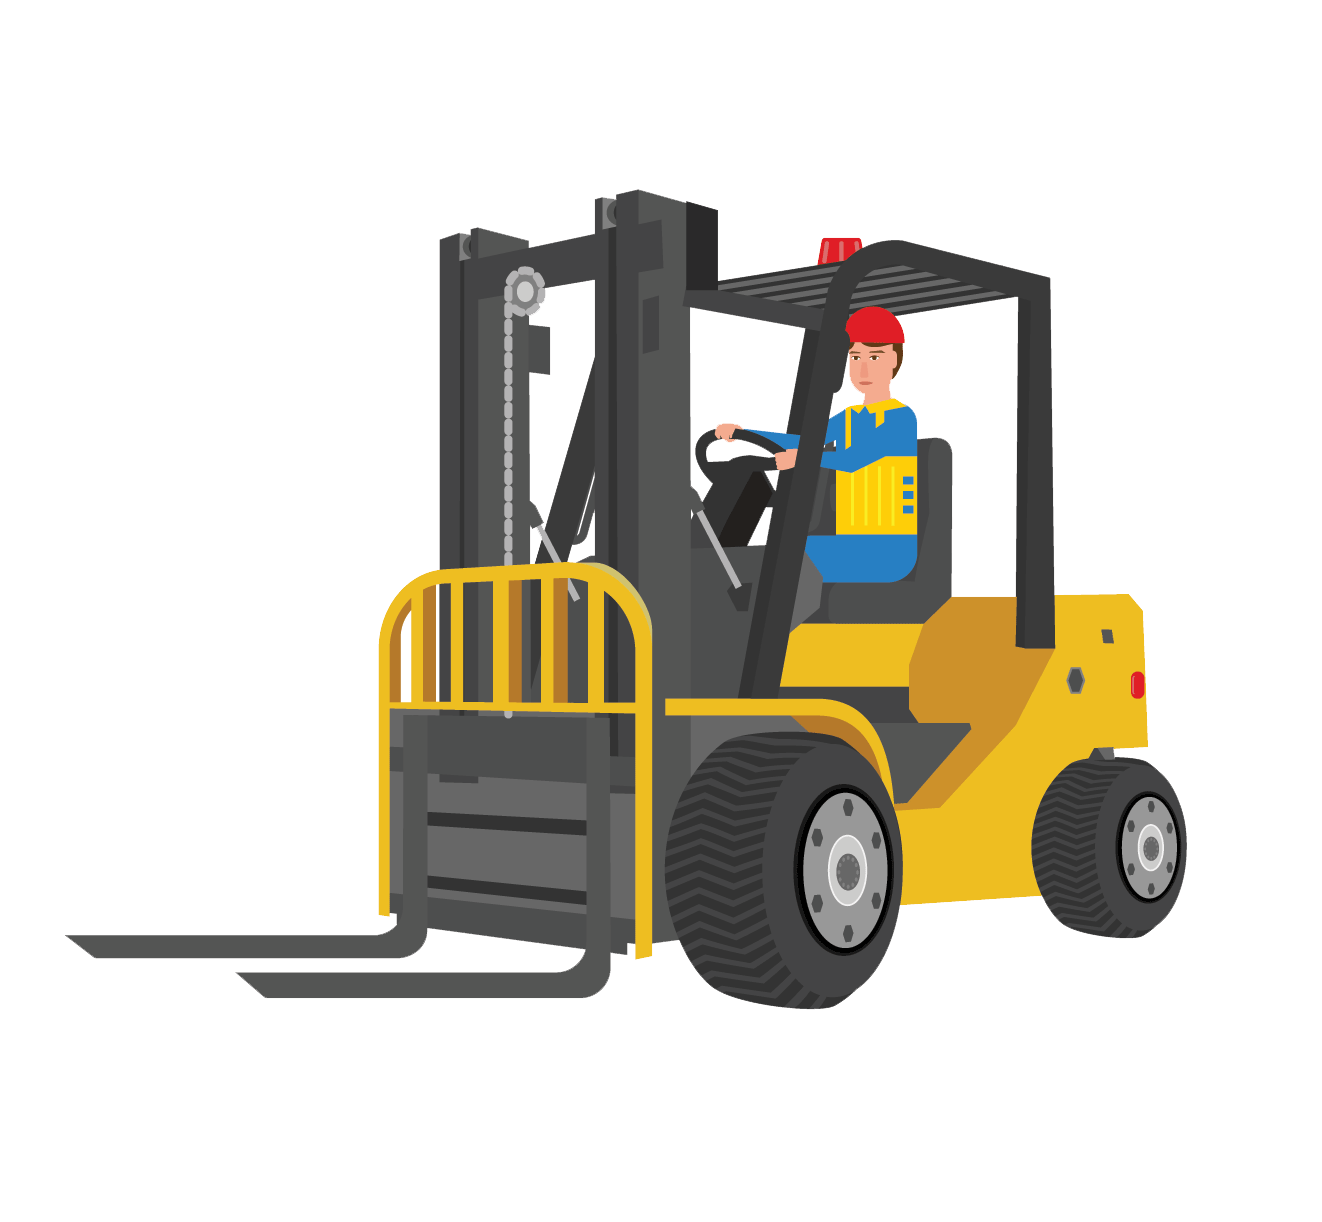 Contact Statewide Forklift Llc